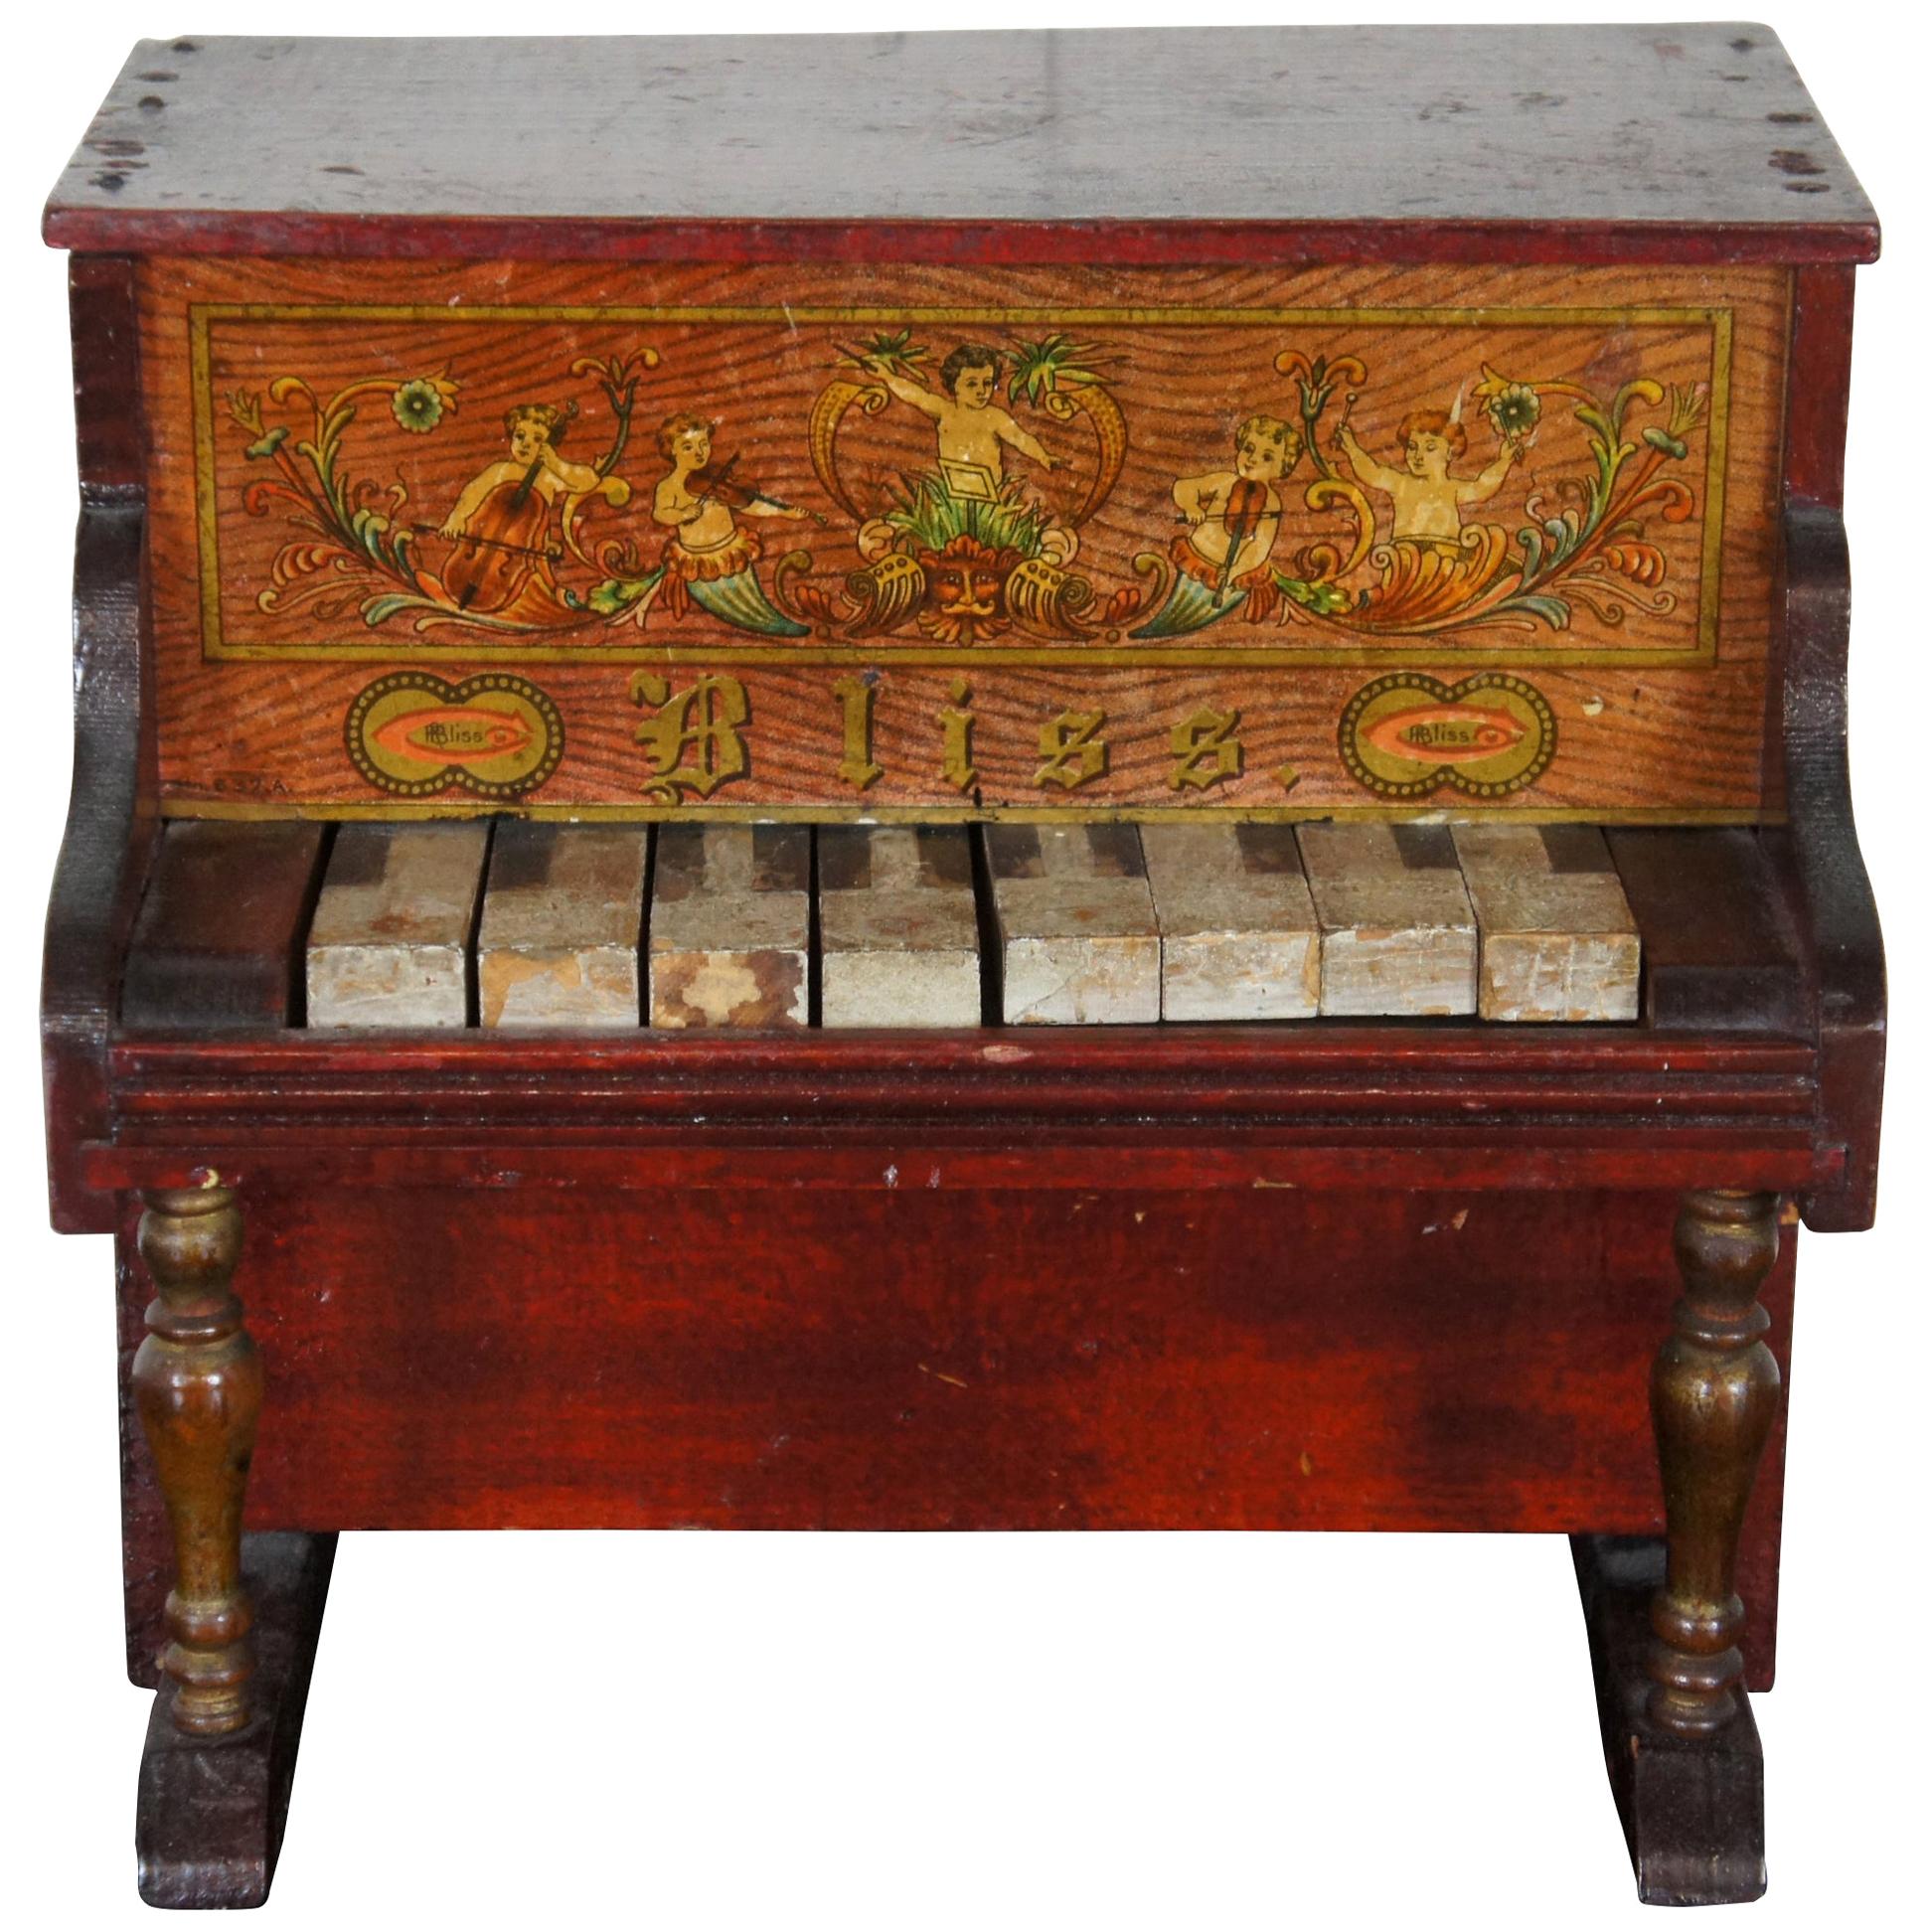 Antique German Bliss Miniature Upright Toy Piano Glockenspiel Lithograph Wood